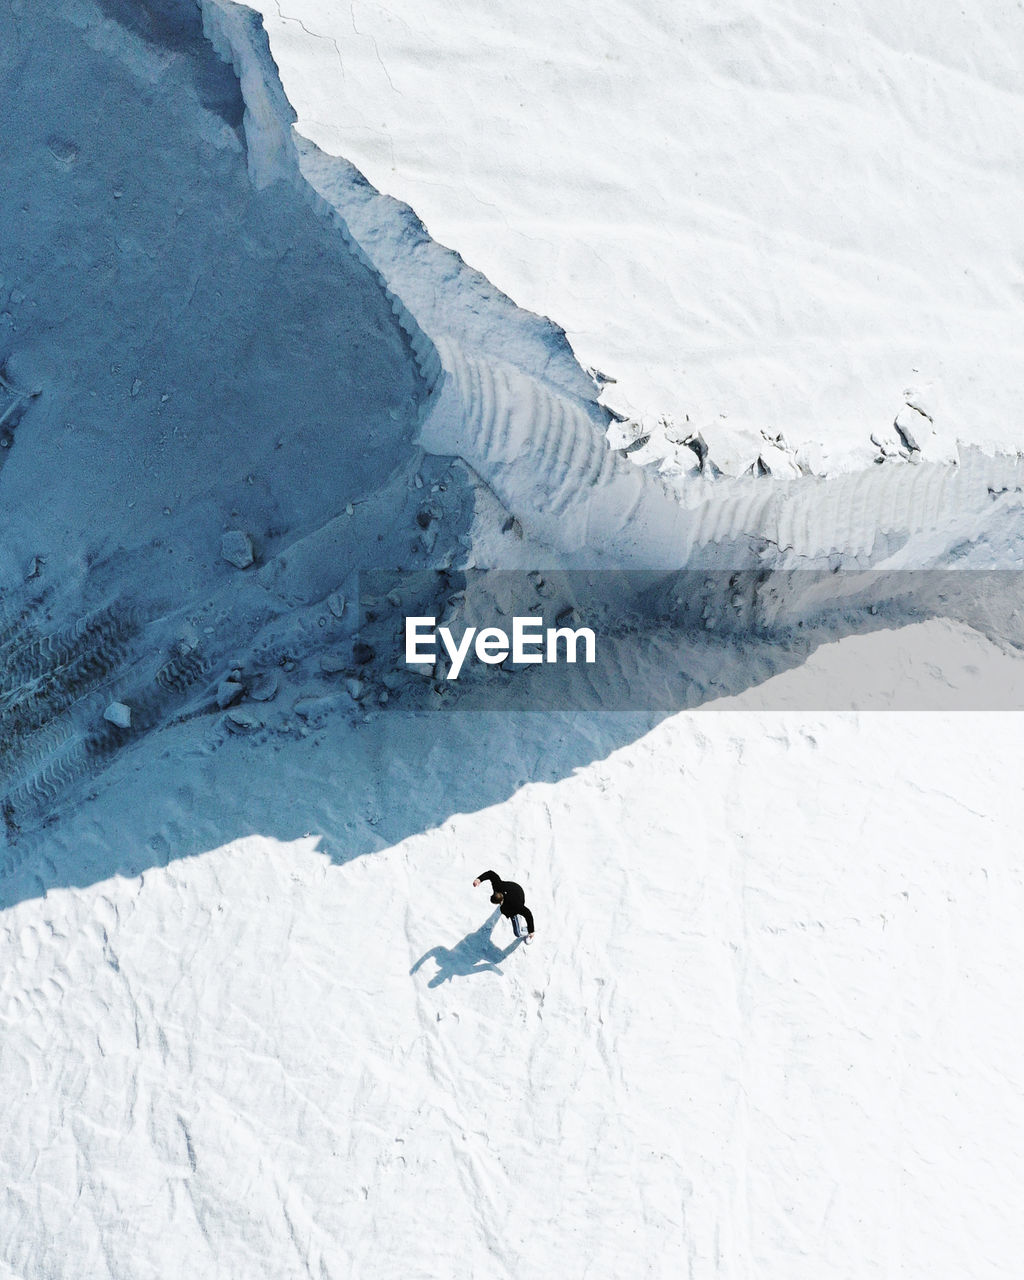 HIGH ANGLE VIEW OF PERSON SKIING ON SNOWCAPPED MOUNTAINS